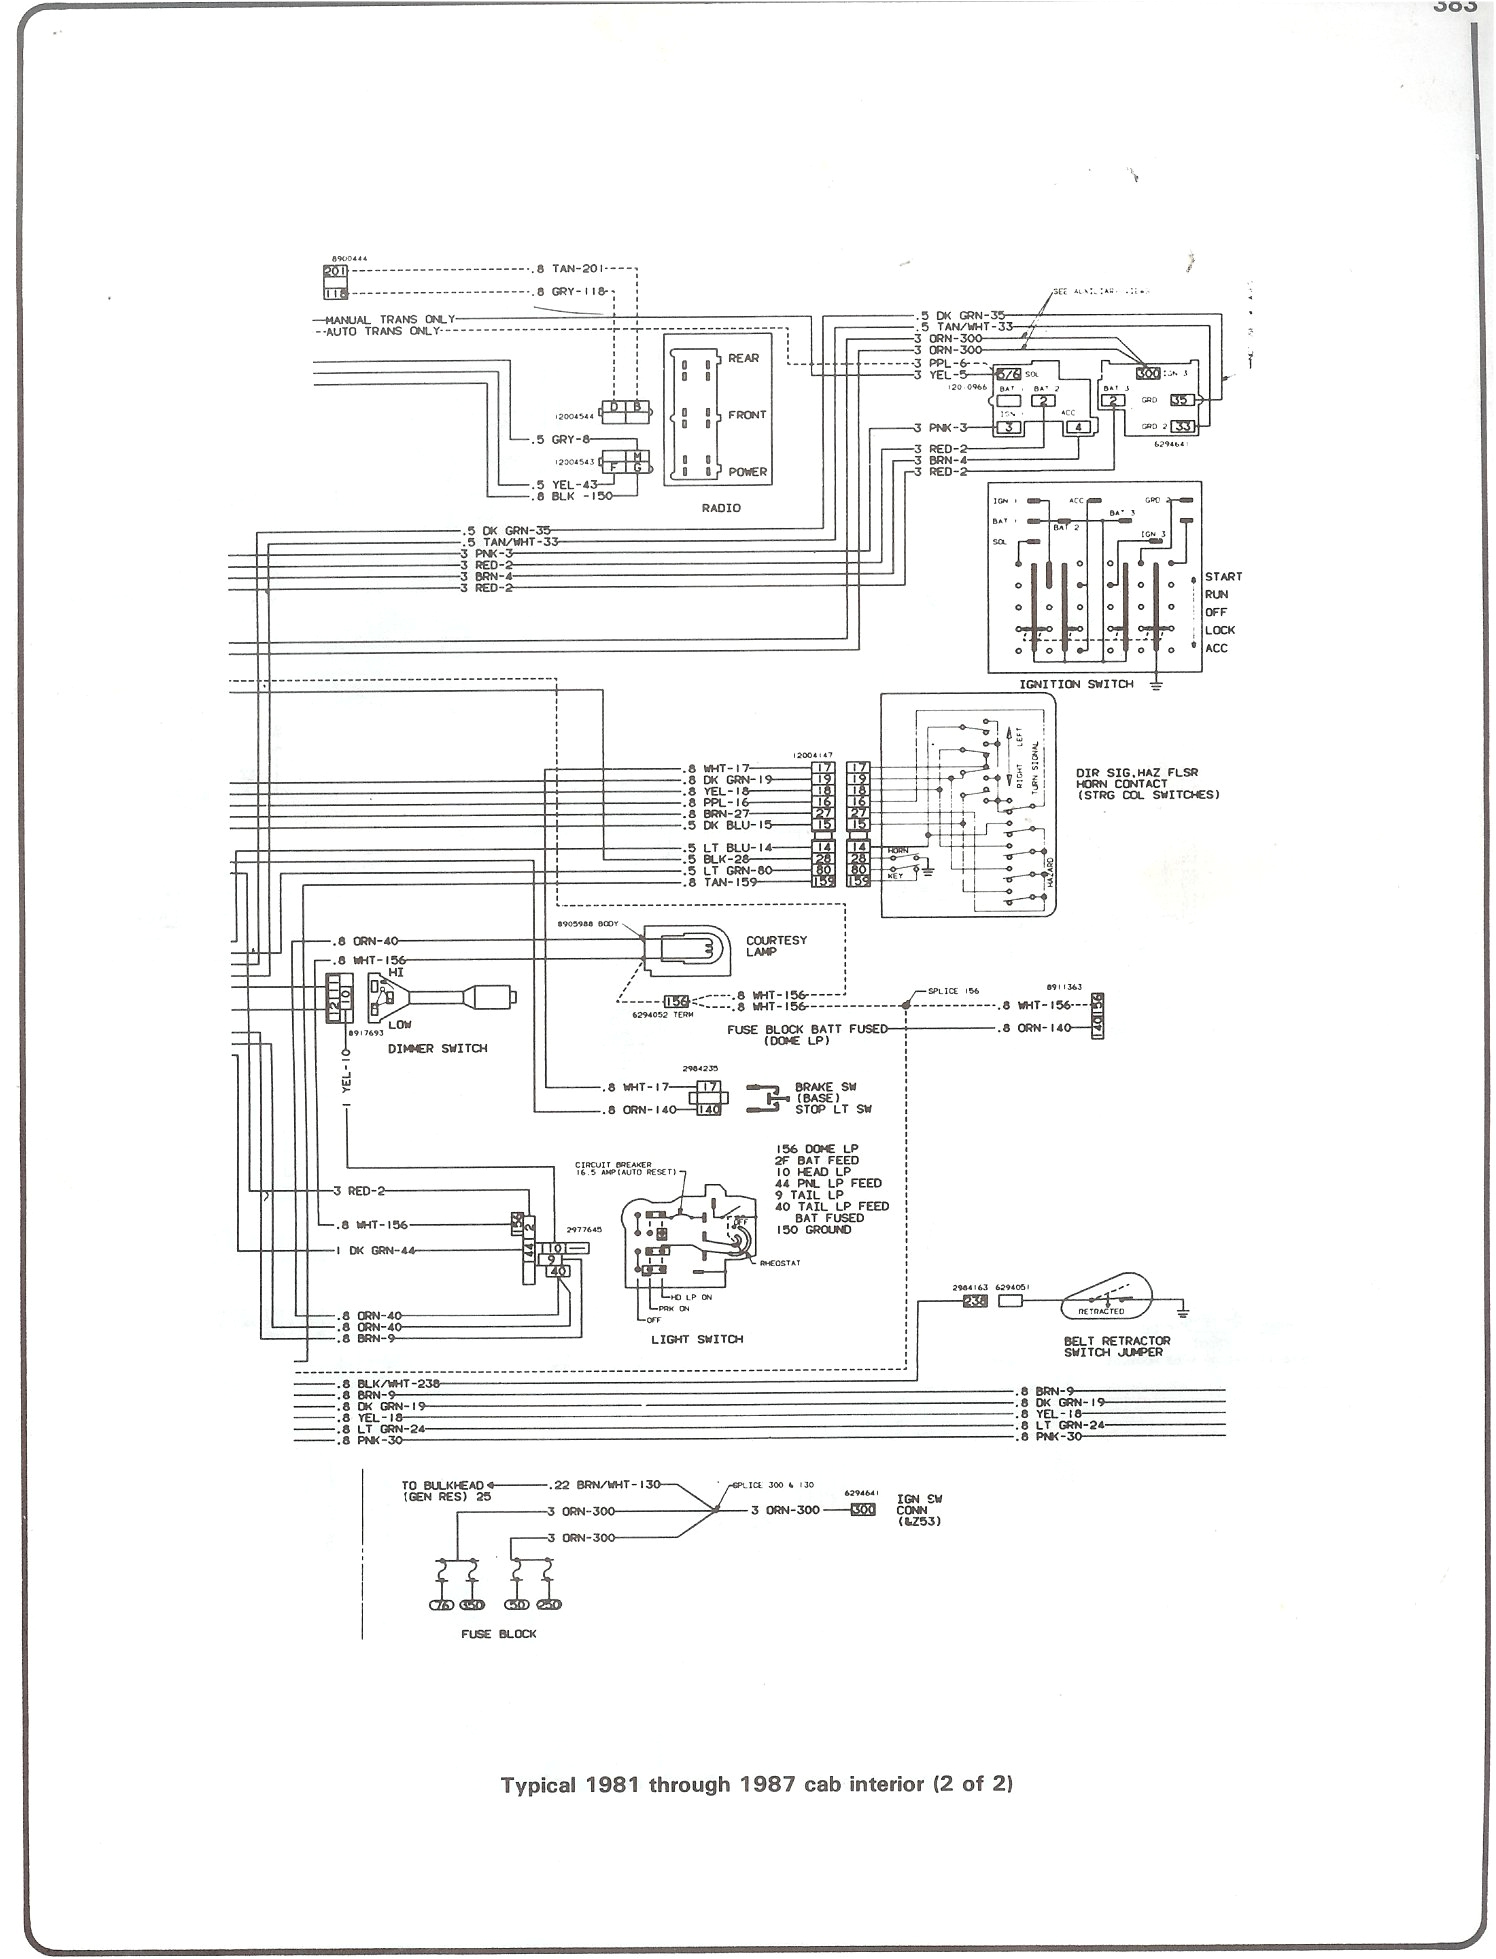 complete 73 87 wiring diagrams 1976 chevy 350 wiring diagram